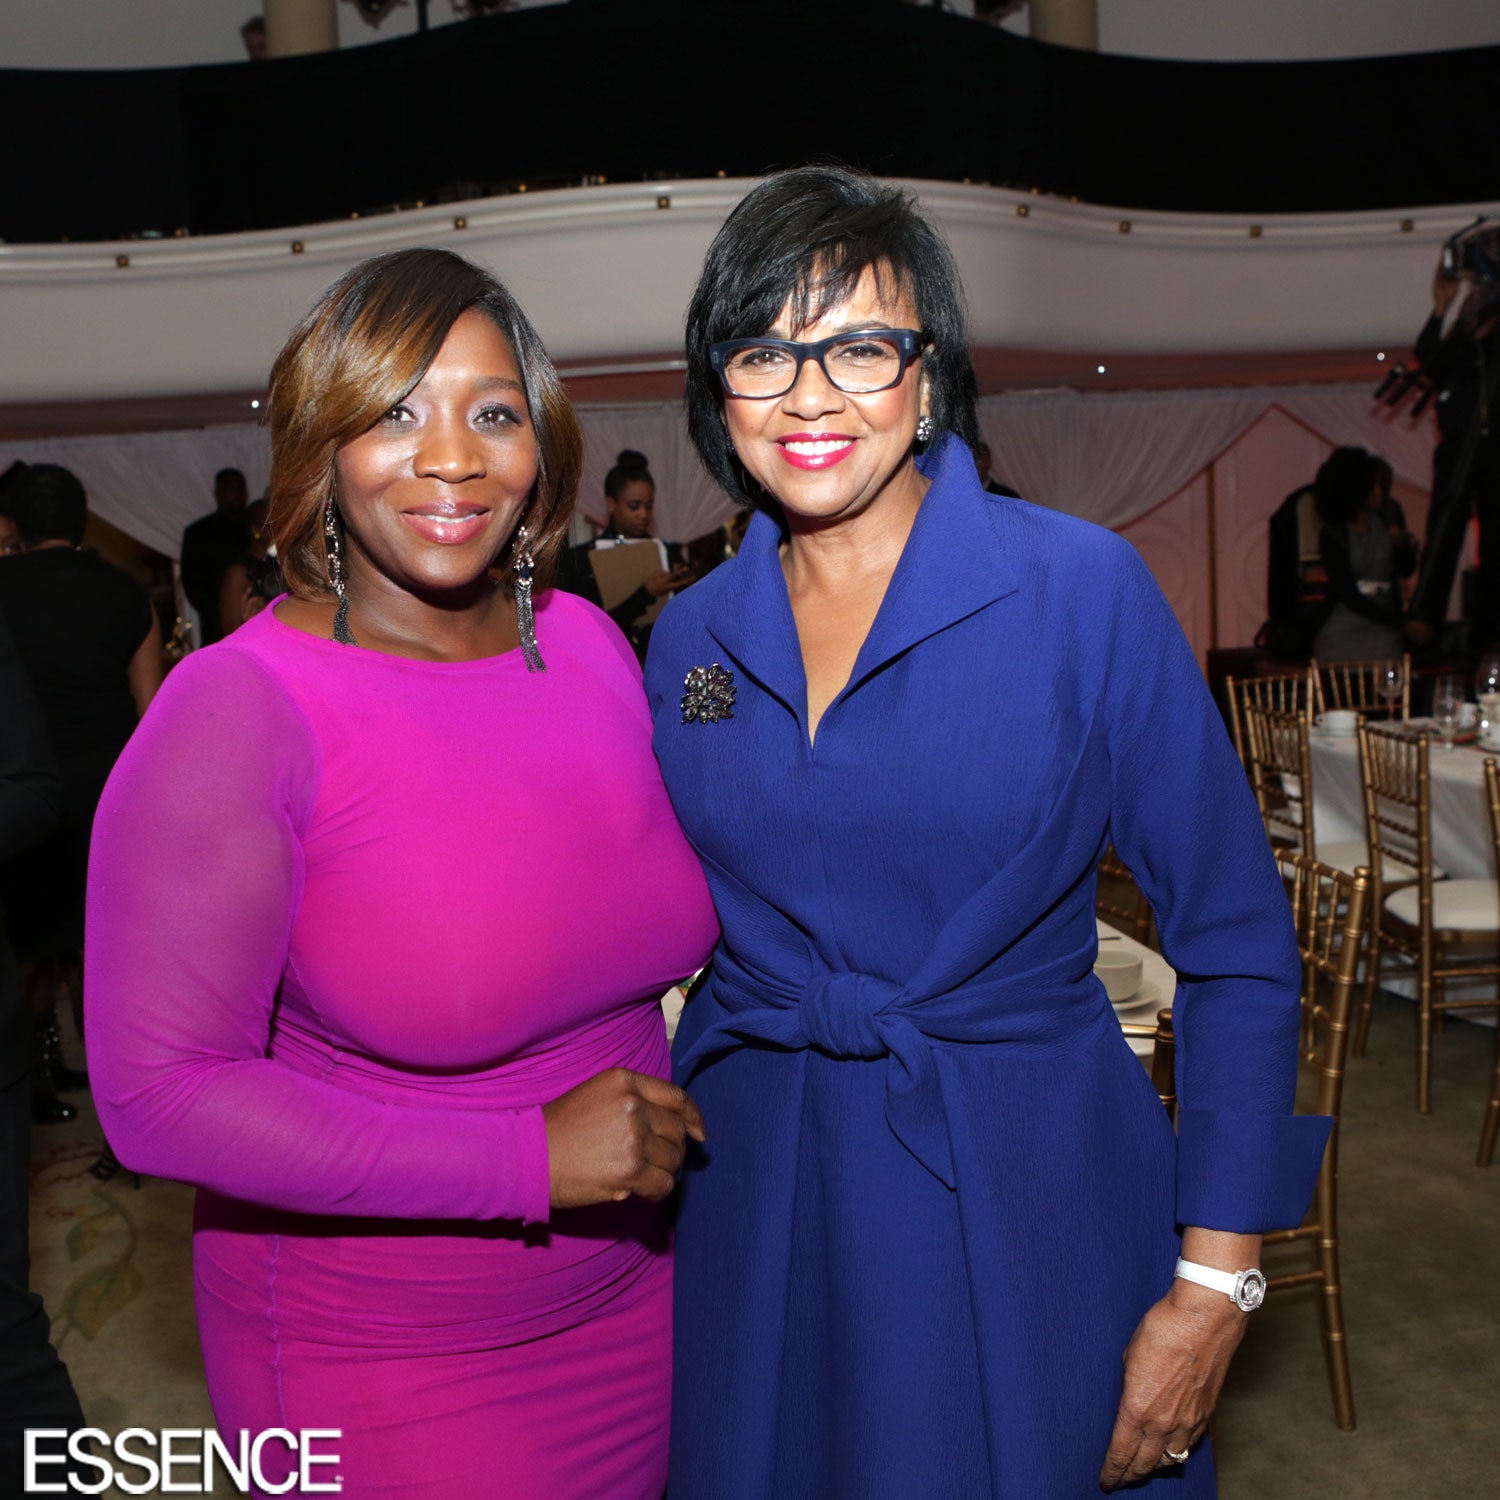 Throwback Moments From ESSENCE's Black Women In Hollywood
